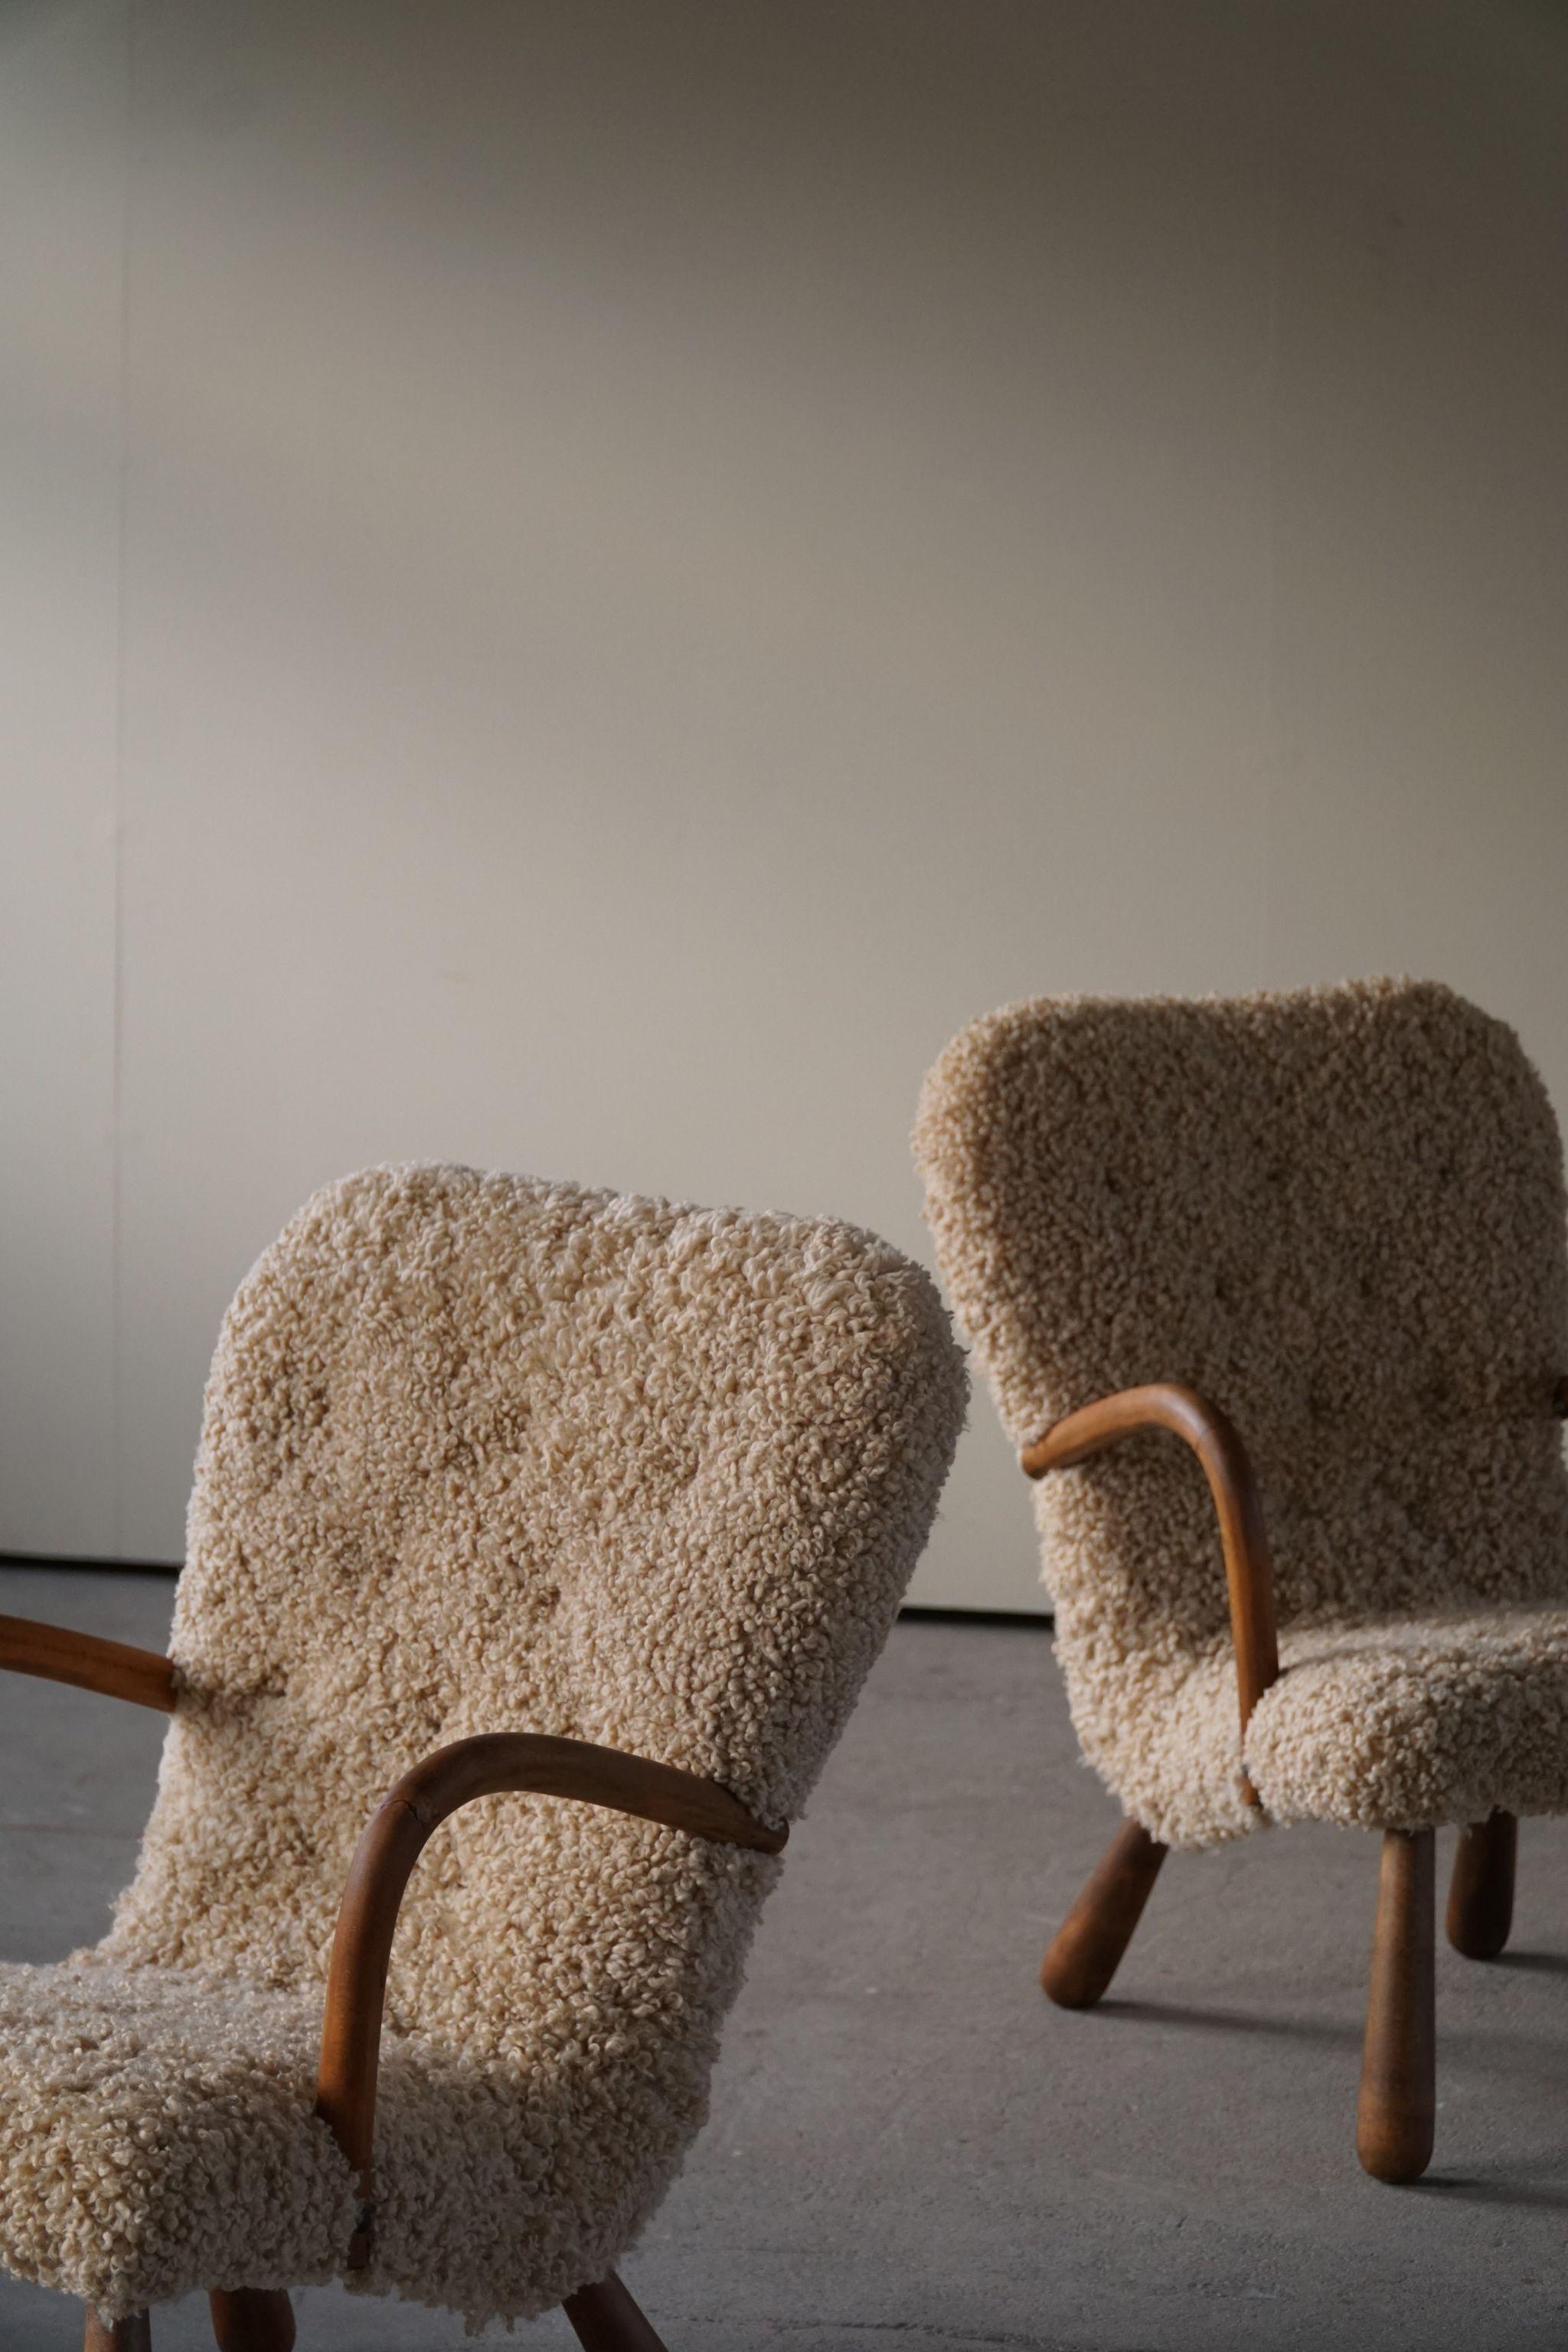 Lambskin Pair of Clam Lounge Chairs in Lambswool, Skive Møbelfabrik, Denmark, 1950s For Sale